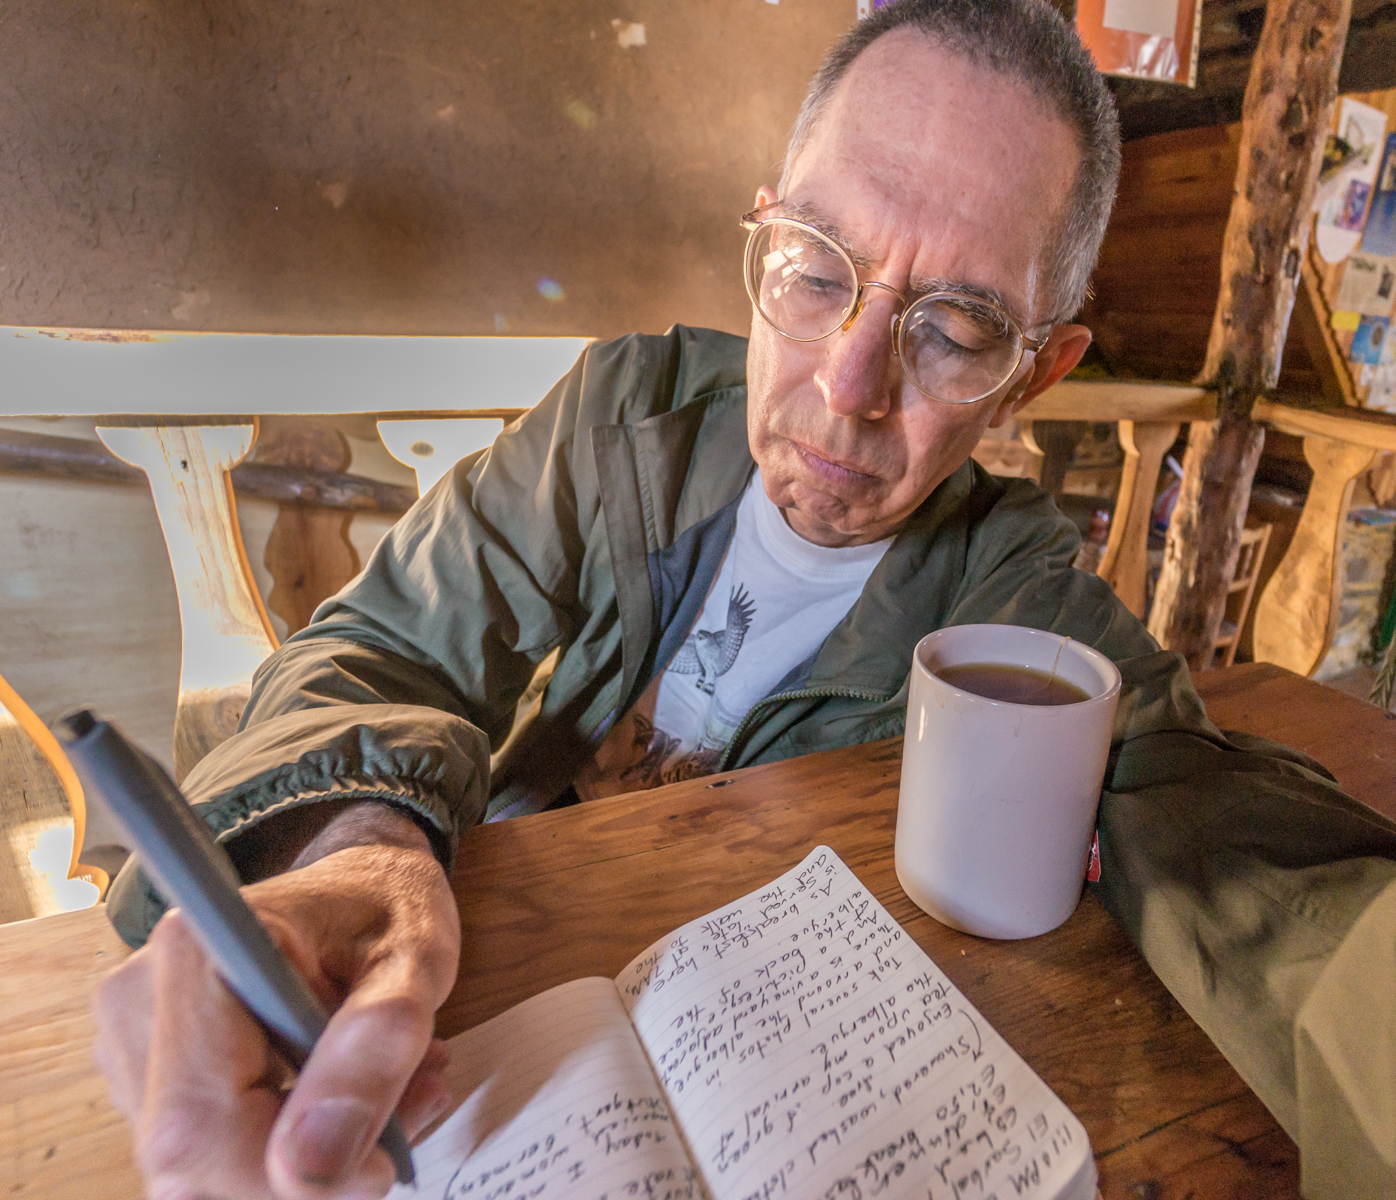 Pilgrim/photographer Mike Hudak enjoying a cup of tea and writing in his diary at Albergue El Serbal y la Luna on the Camino Francs in Pieros, Spain | Photo by Mike Hudak